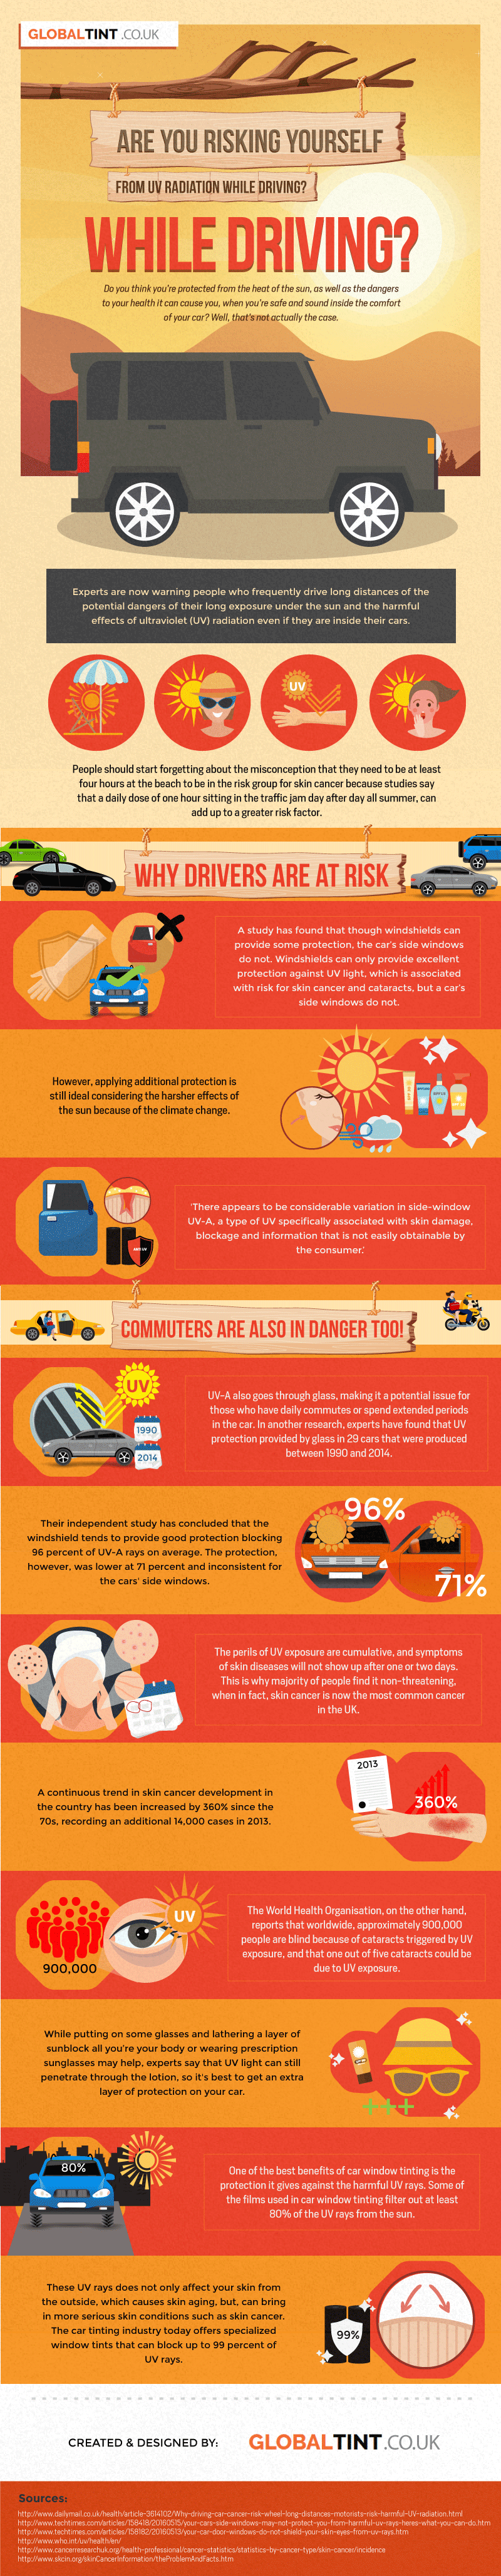 Are You Risking Yourself From UV Radiation While Driving? - Infographic